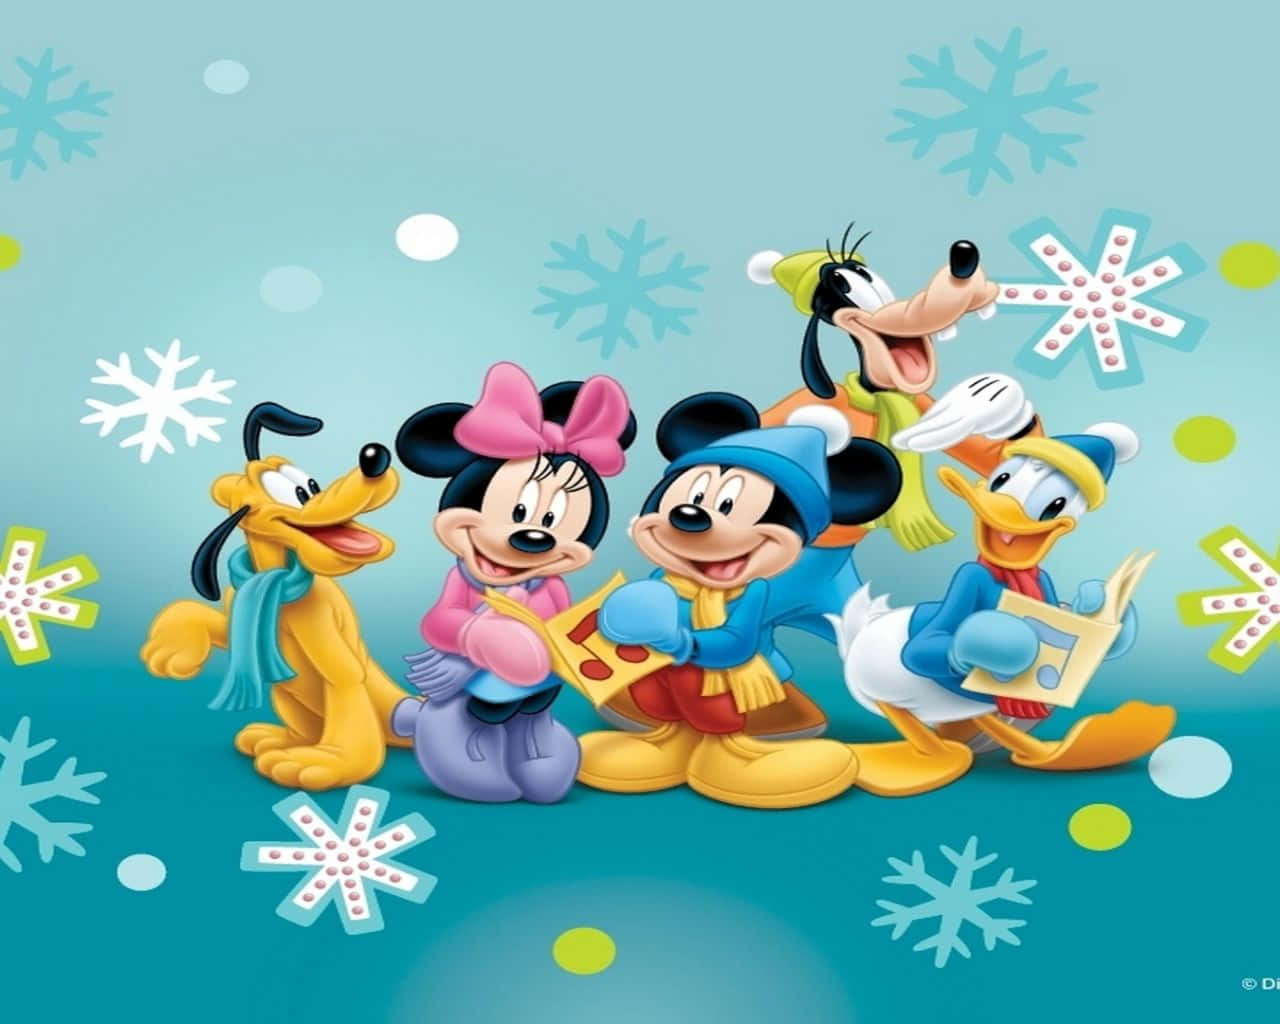 Celebrate the New Year With Mickey Mouse Wallpaper